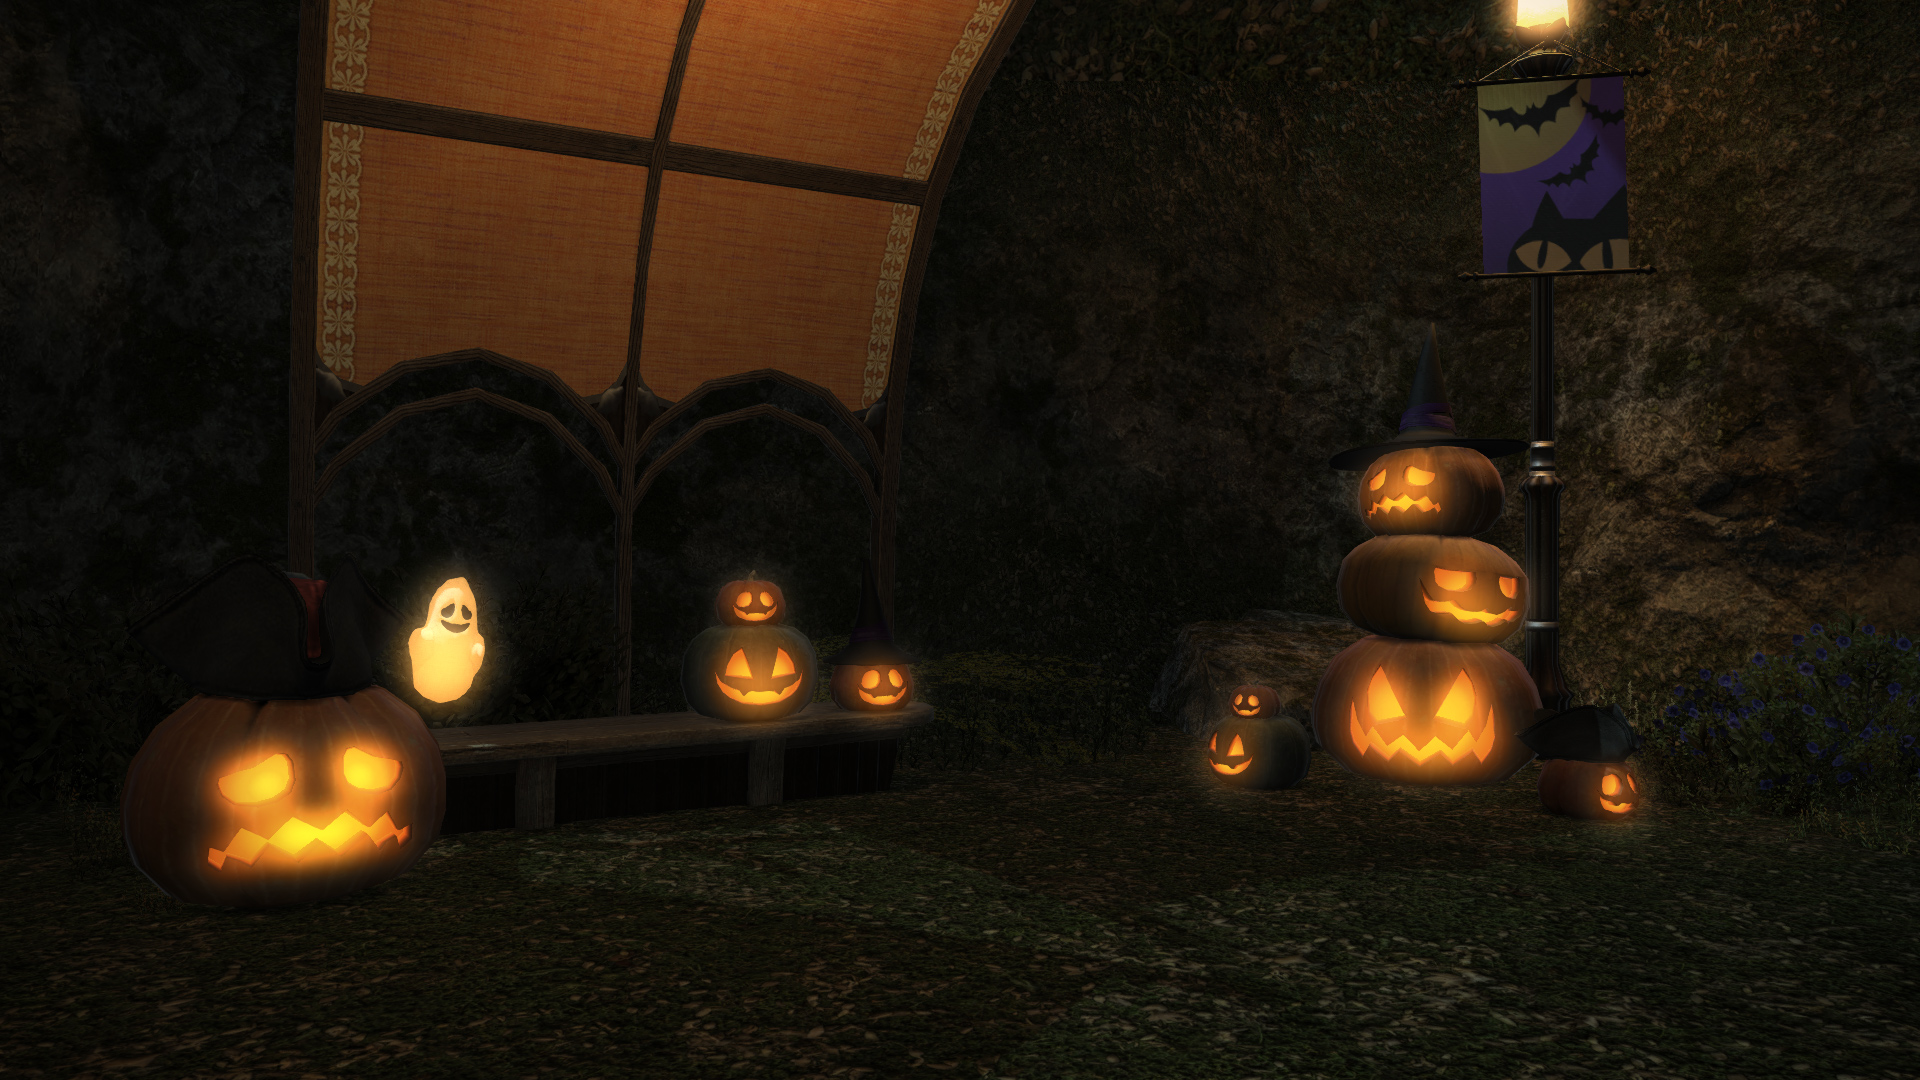 FFXIV All Saints Day Decorations from Shadow of Death hosted by